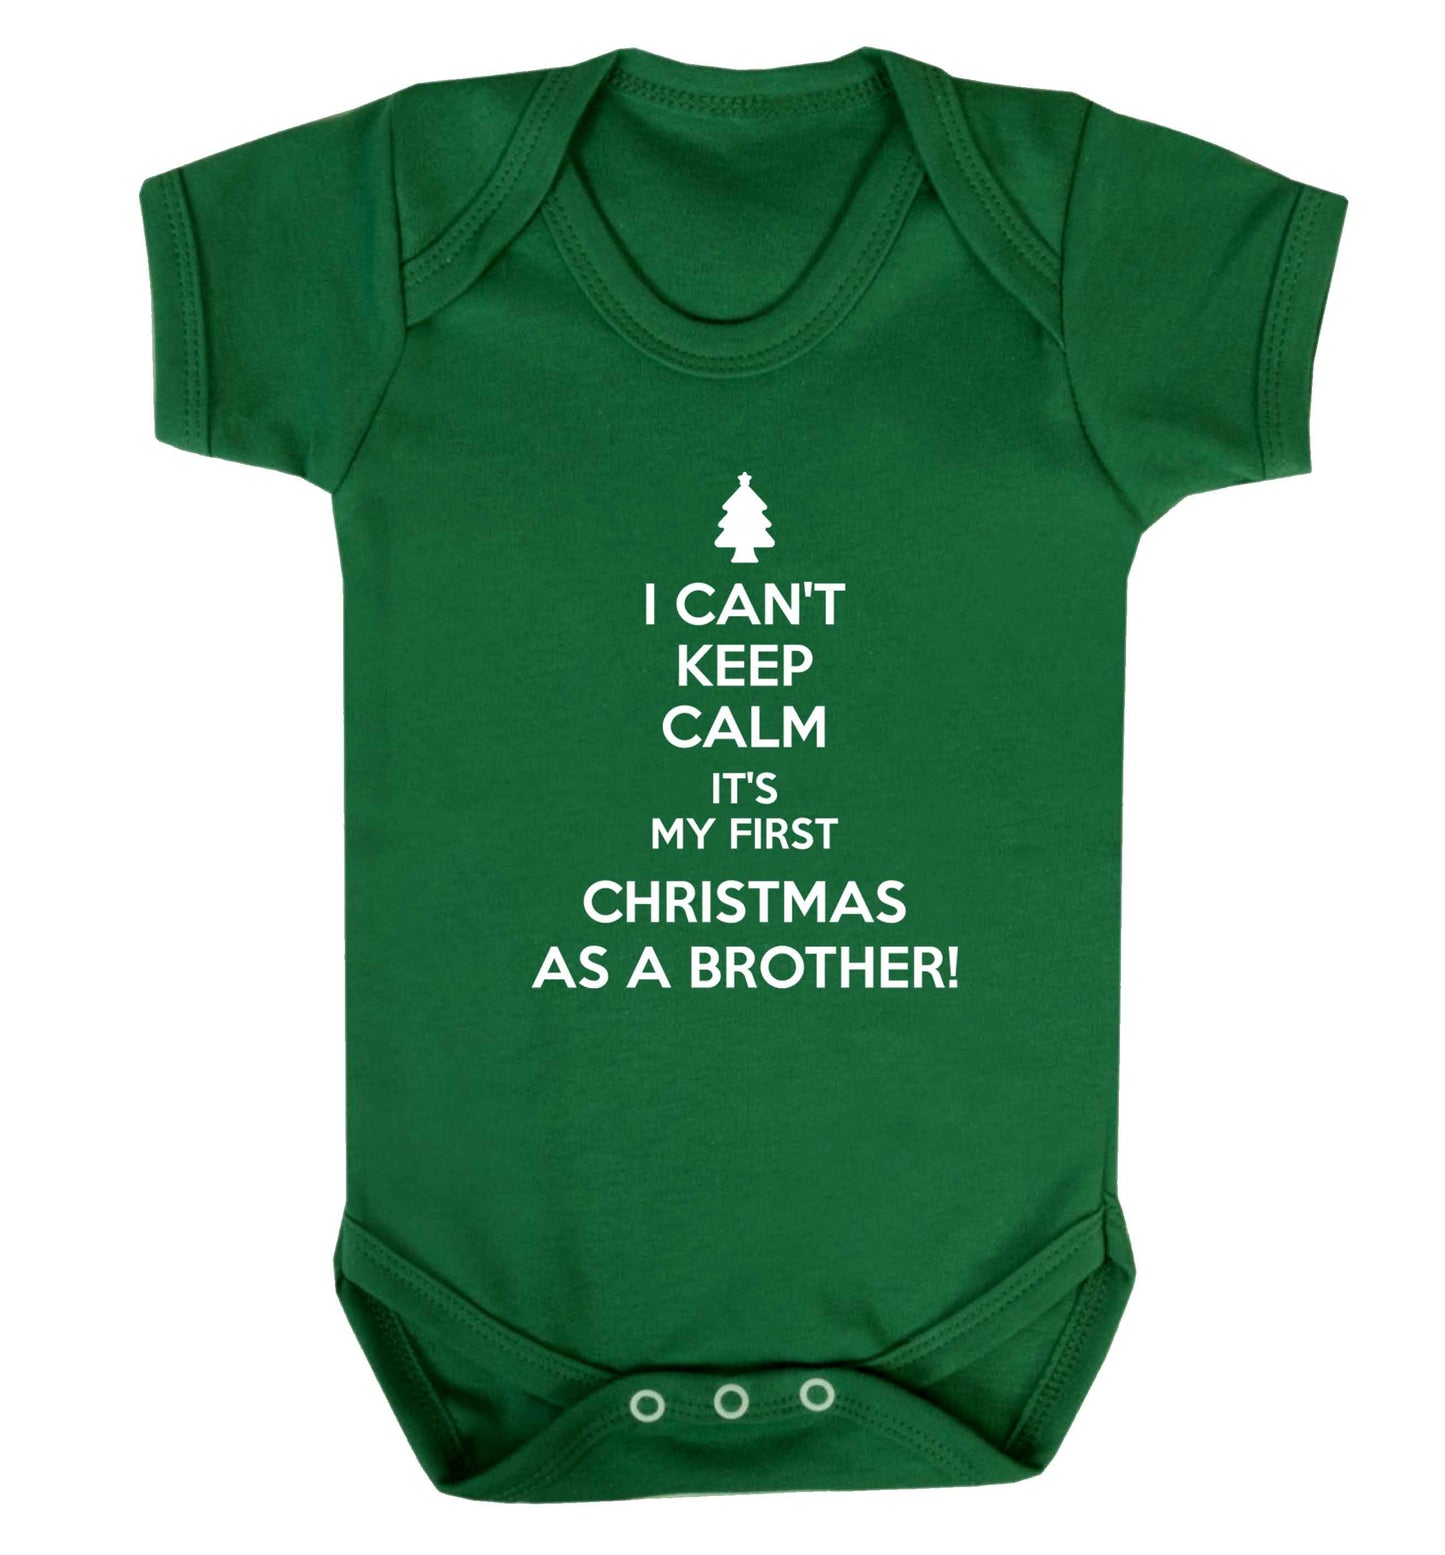 I can't keep calm it's my first Christmas as a brother! Baby Vest green 18-24 months